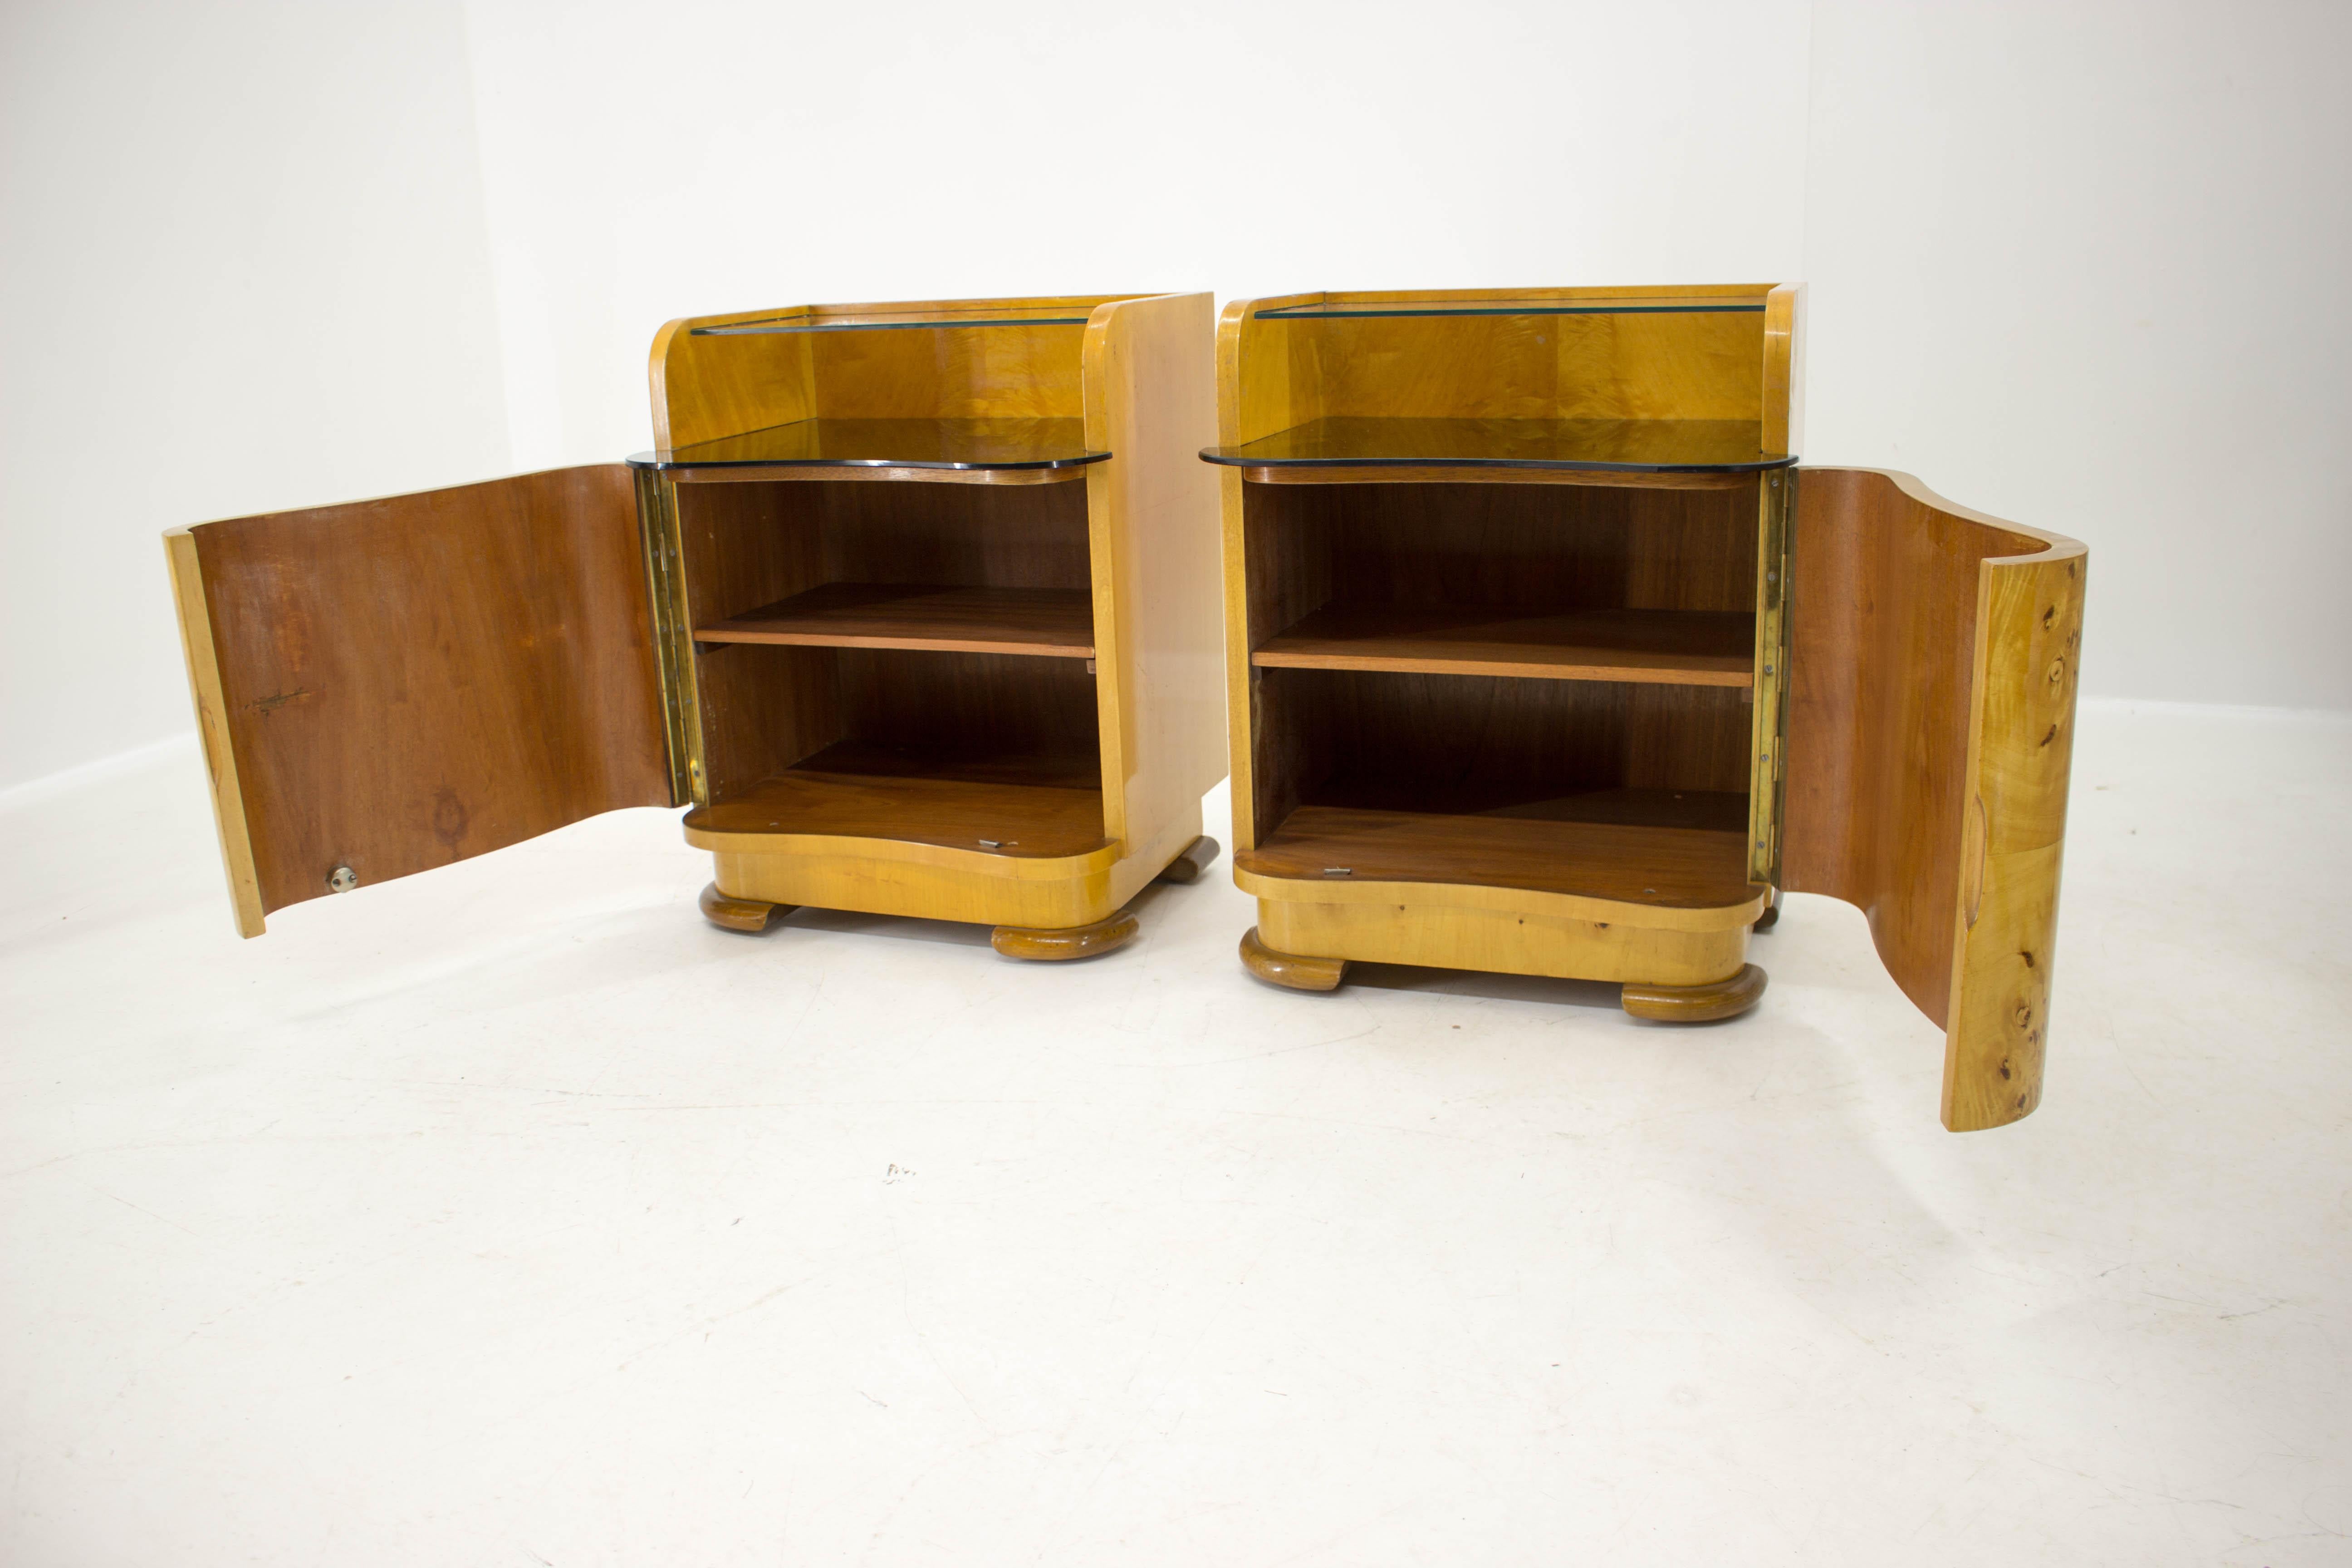 1940s Pair of Bedside Tables by Halabala for UP Zavody, Czechoslovakia 1